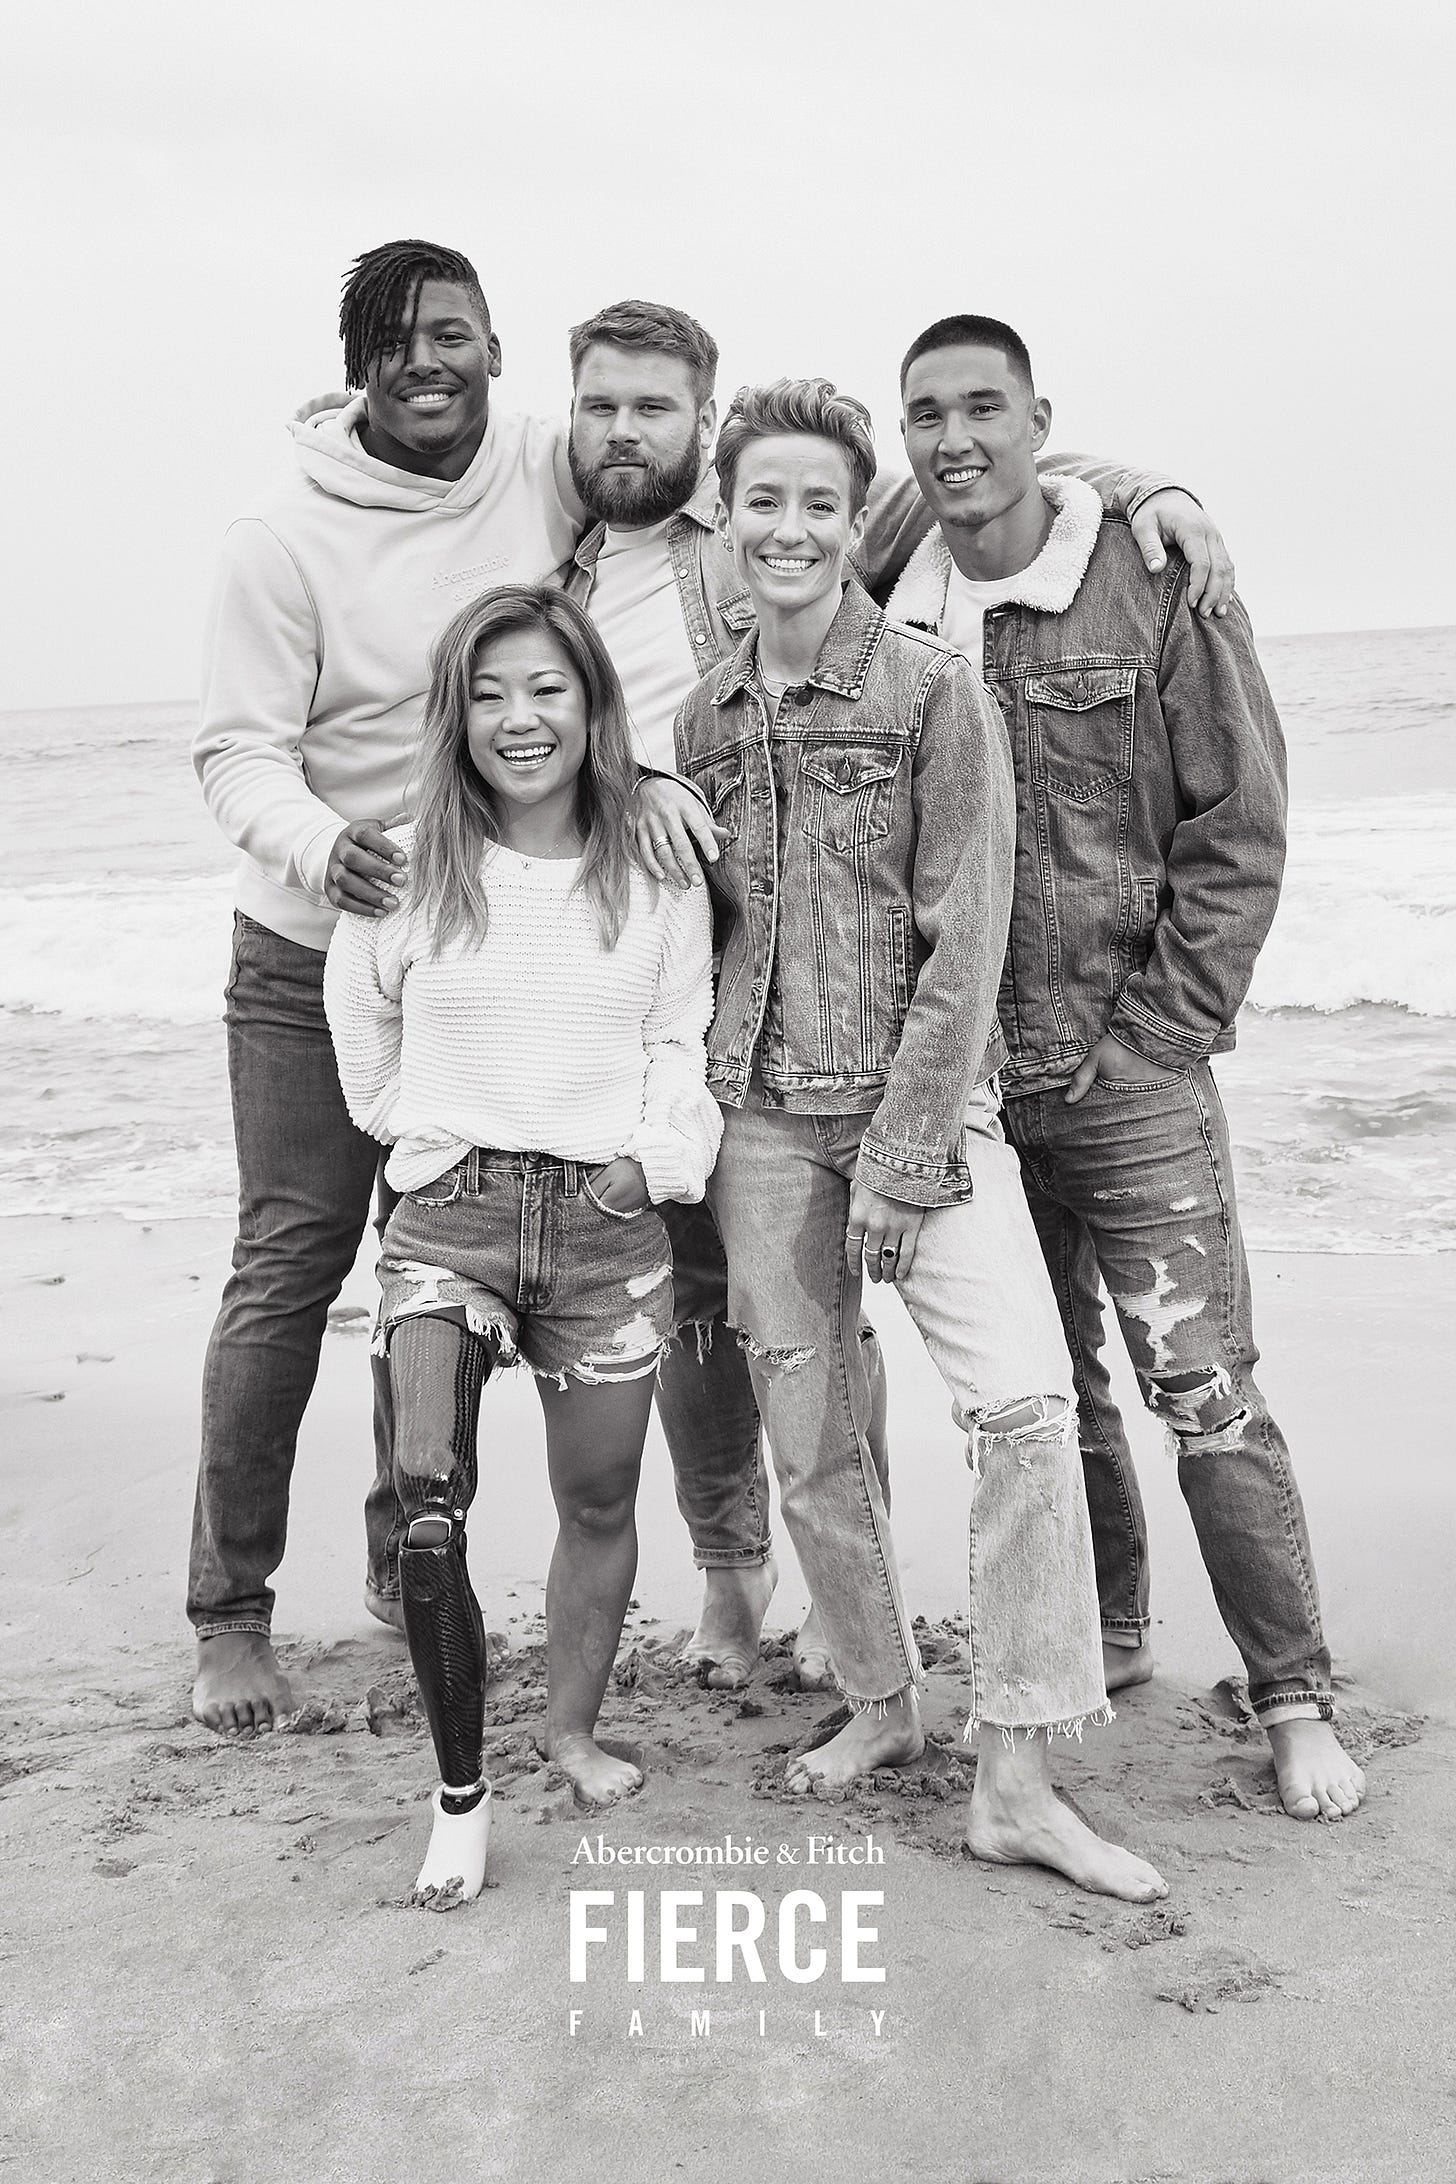 Abercrombie & Fitch launches 'Face Your Fierce' ad campaign